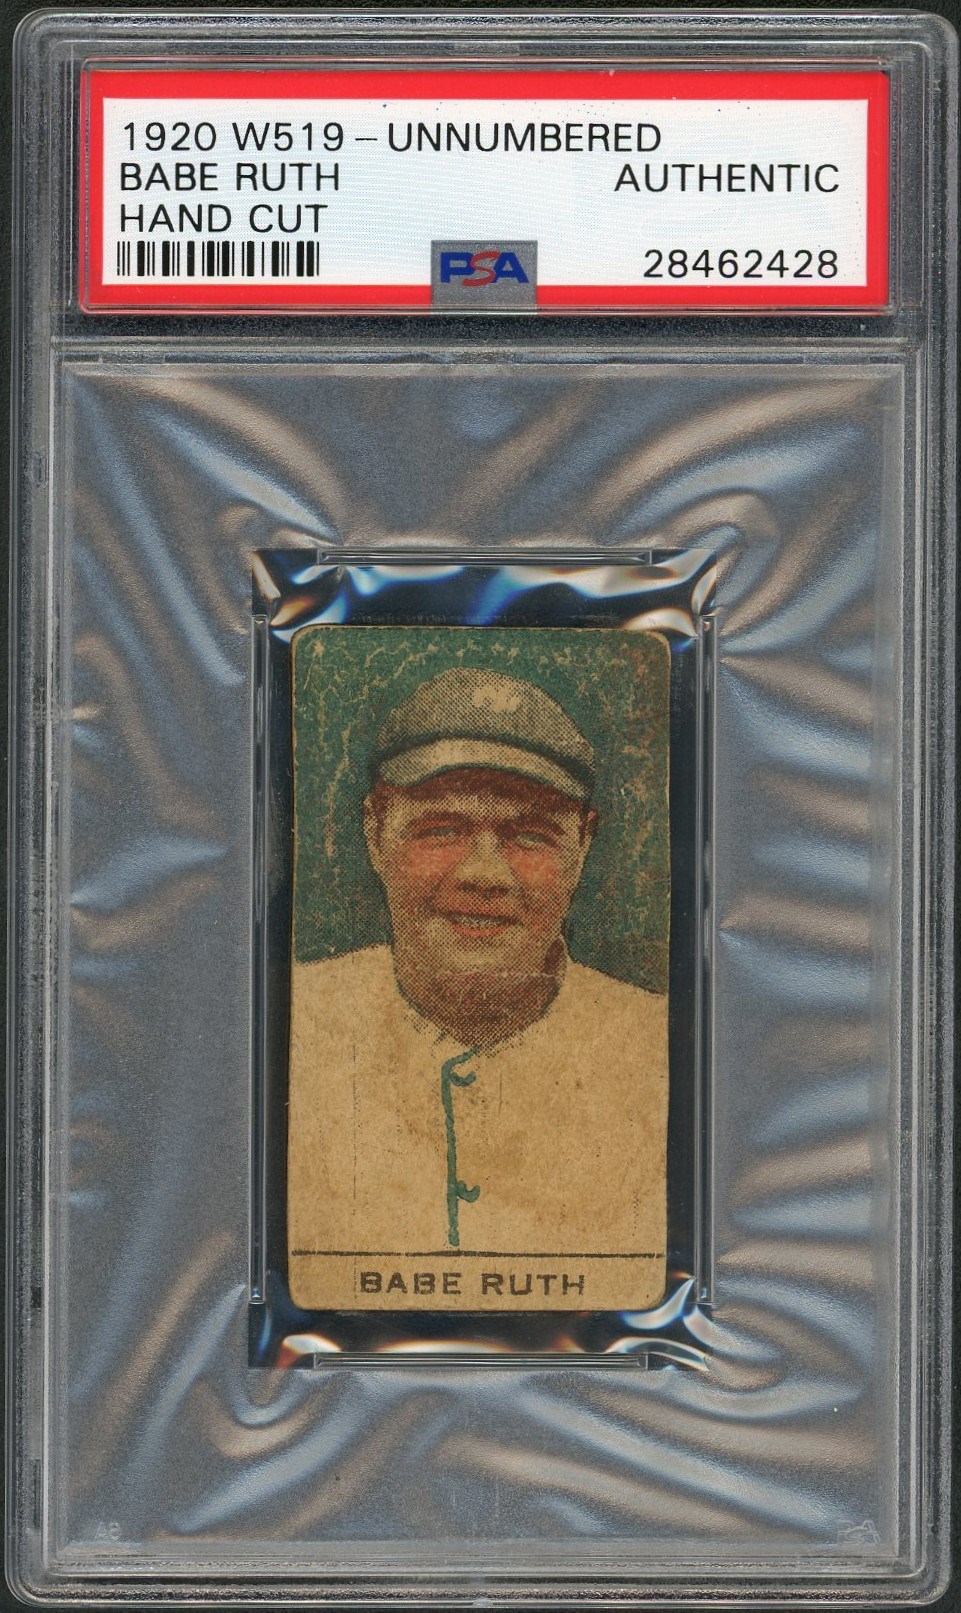 Baseball and Trading Cards - 1920 W519 Unnumbered Babe Ruth (Hand Cut) - PSA AUTHENTIC